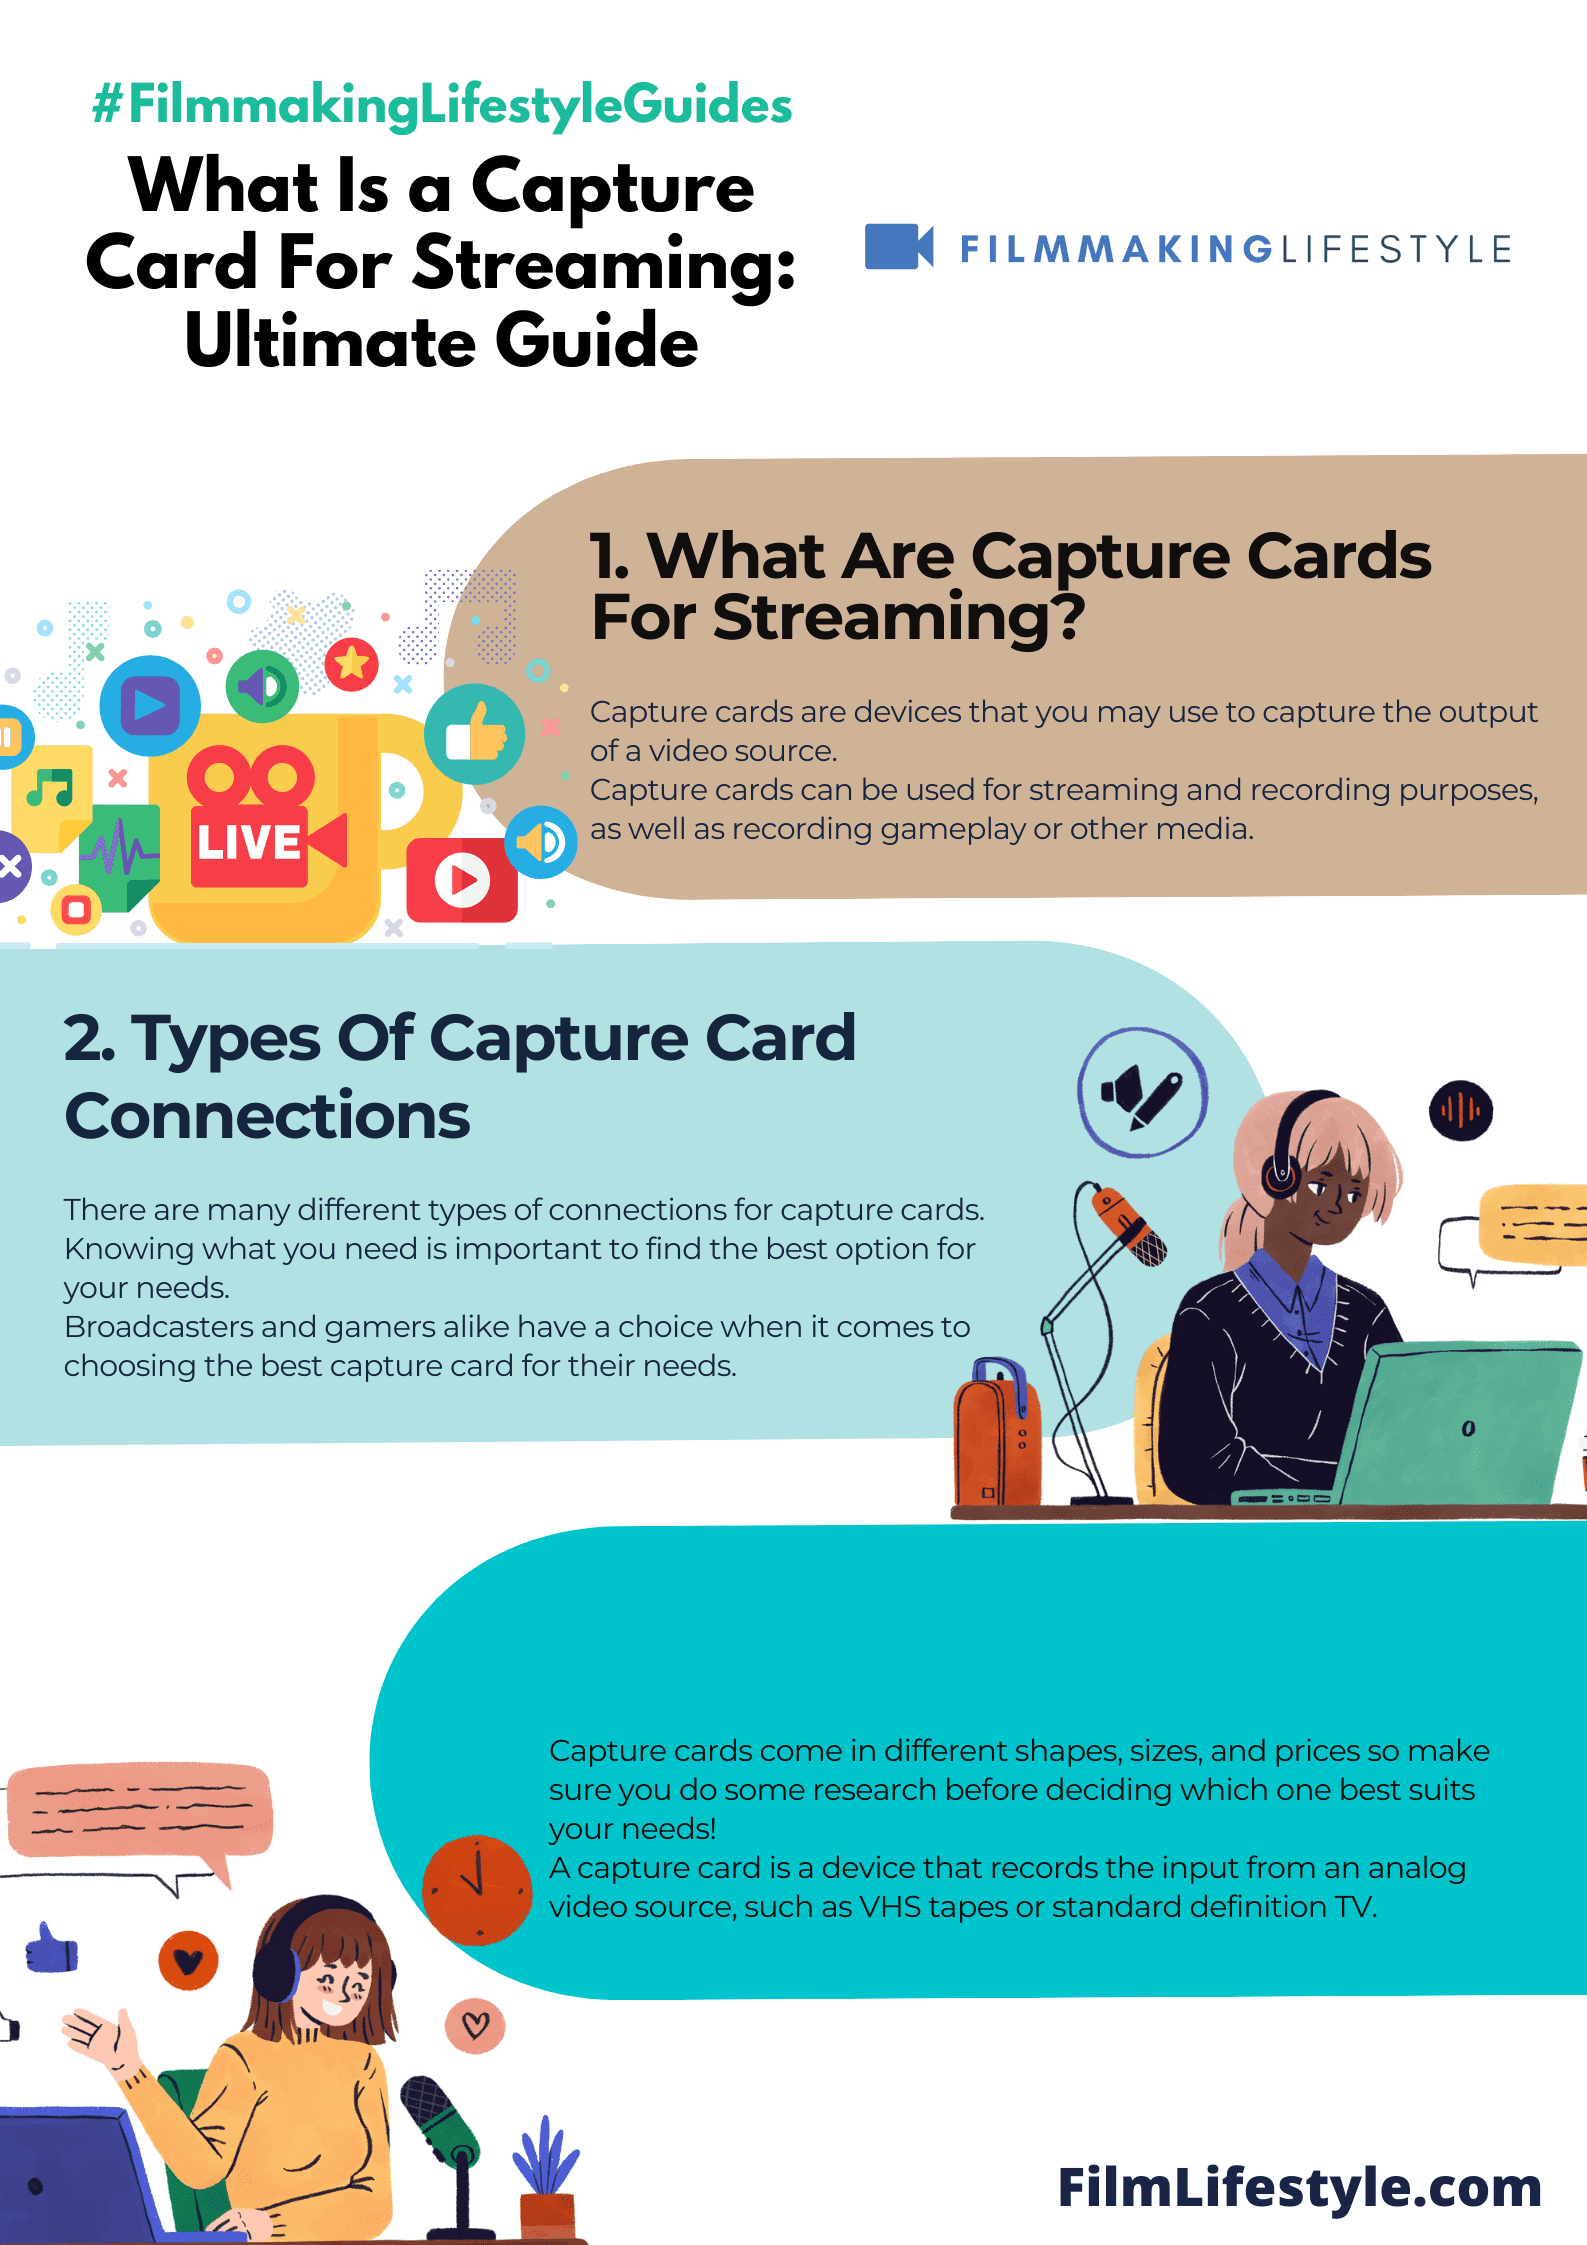 What Is a Capture Card For Streaming